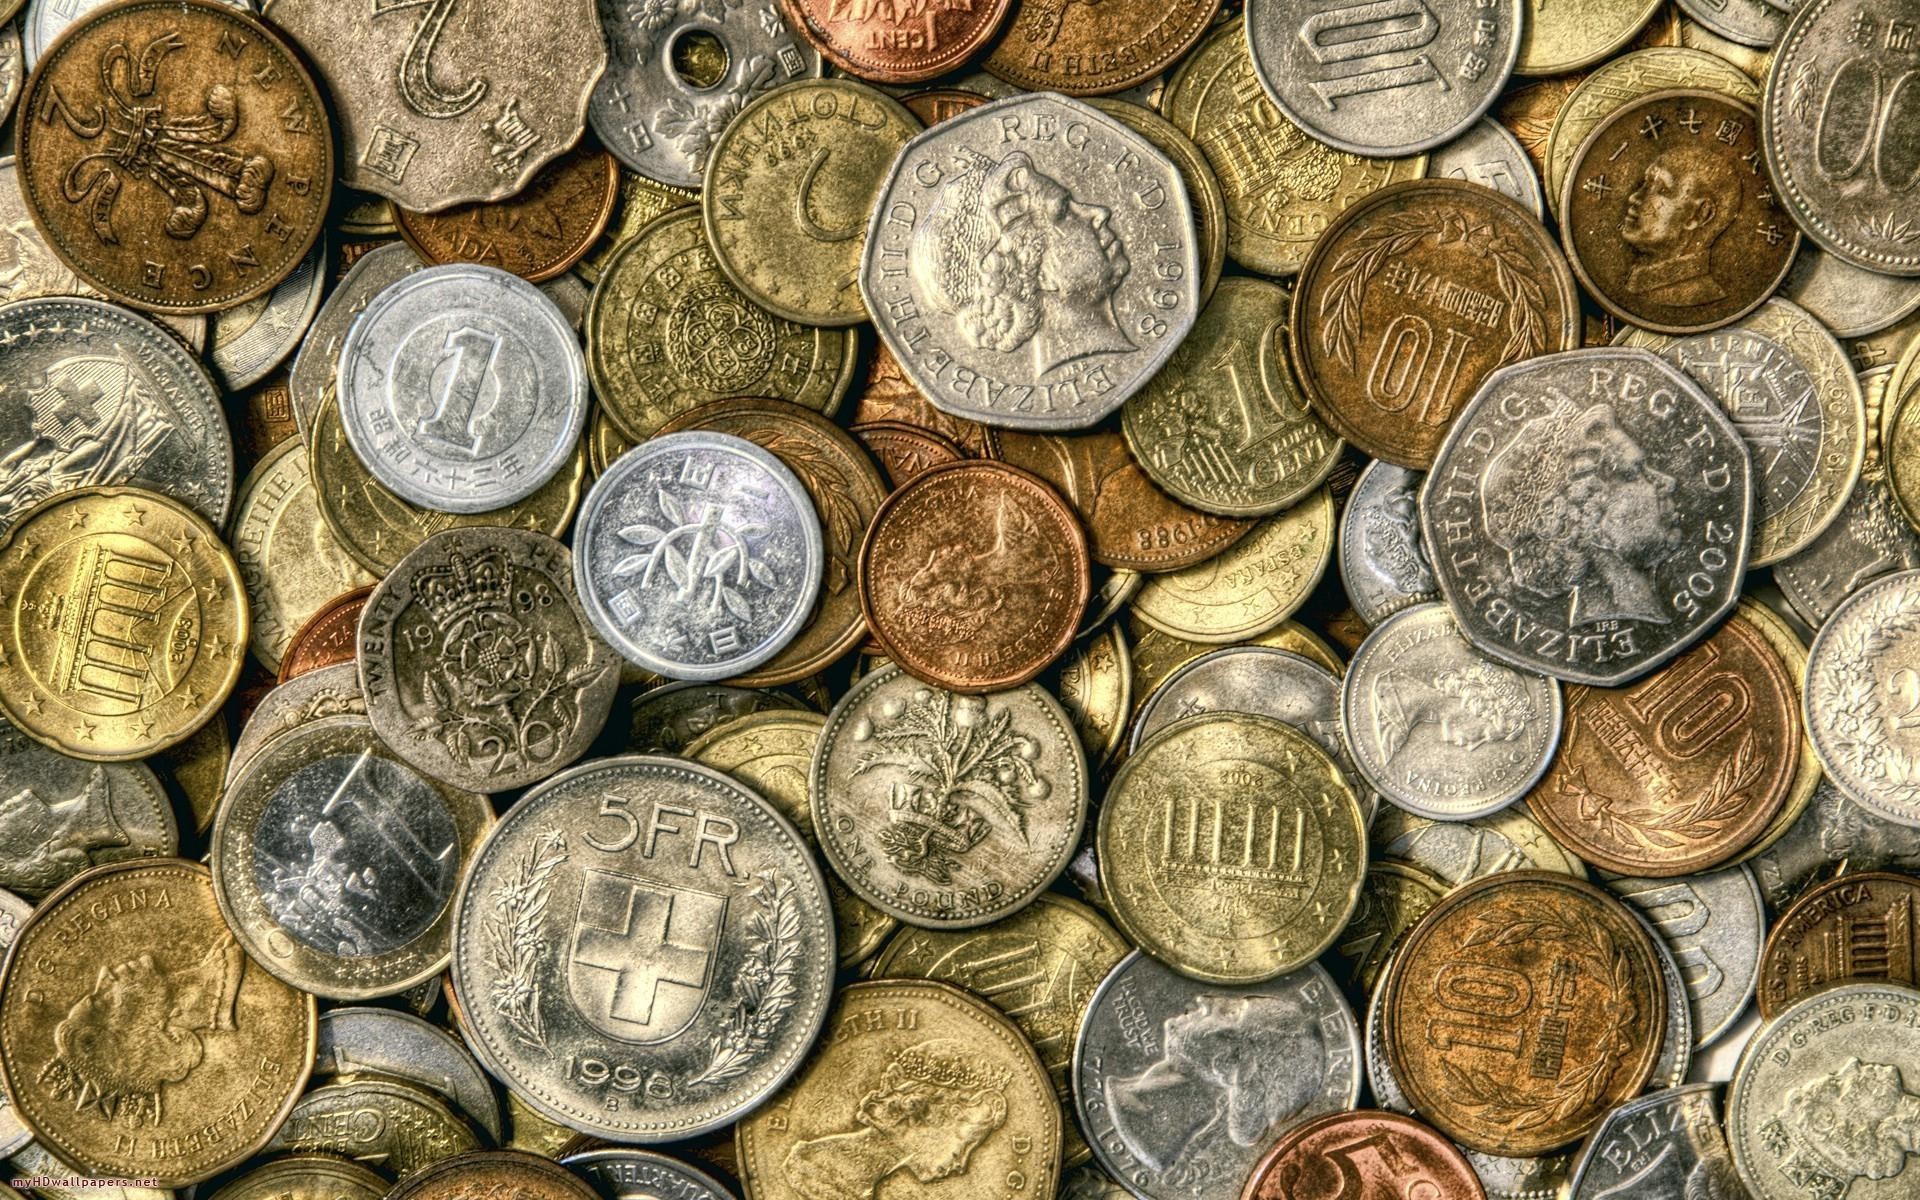 Bunch Of Coins, Worldwide Wallpaper Ultimate wallpapers